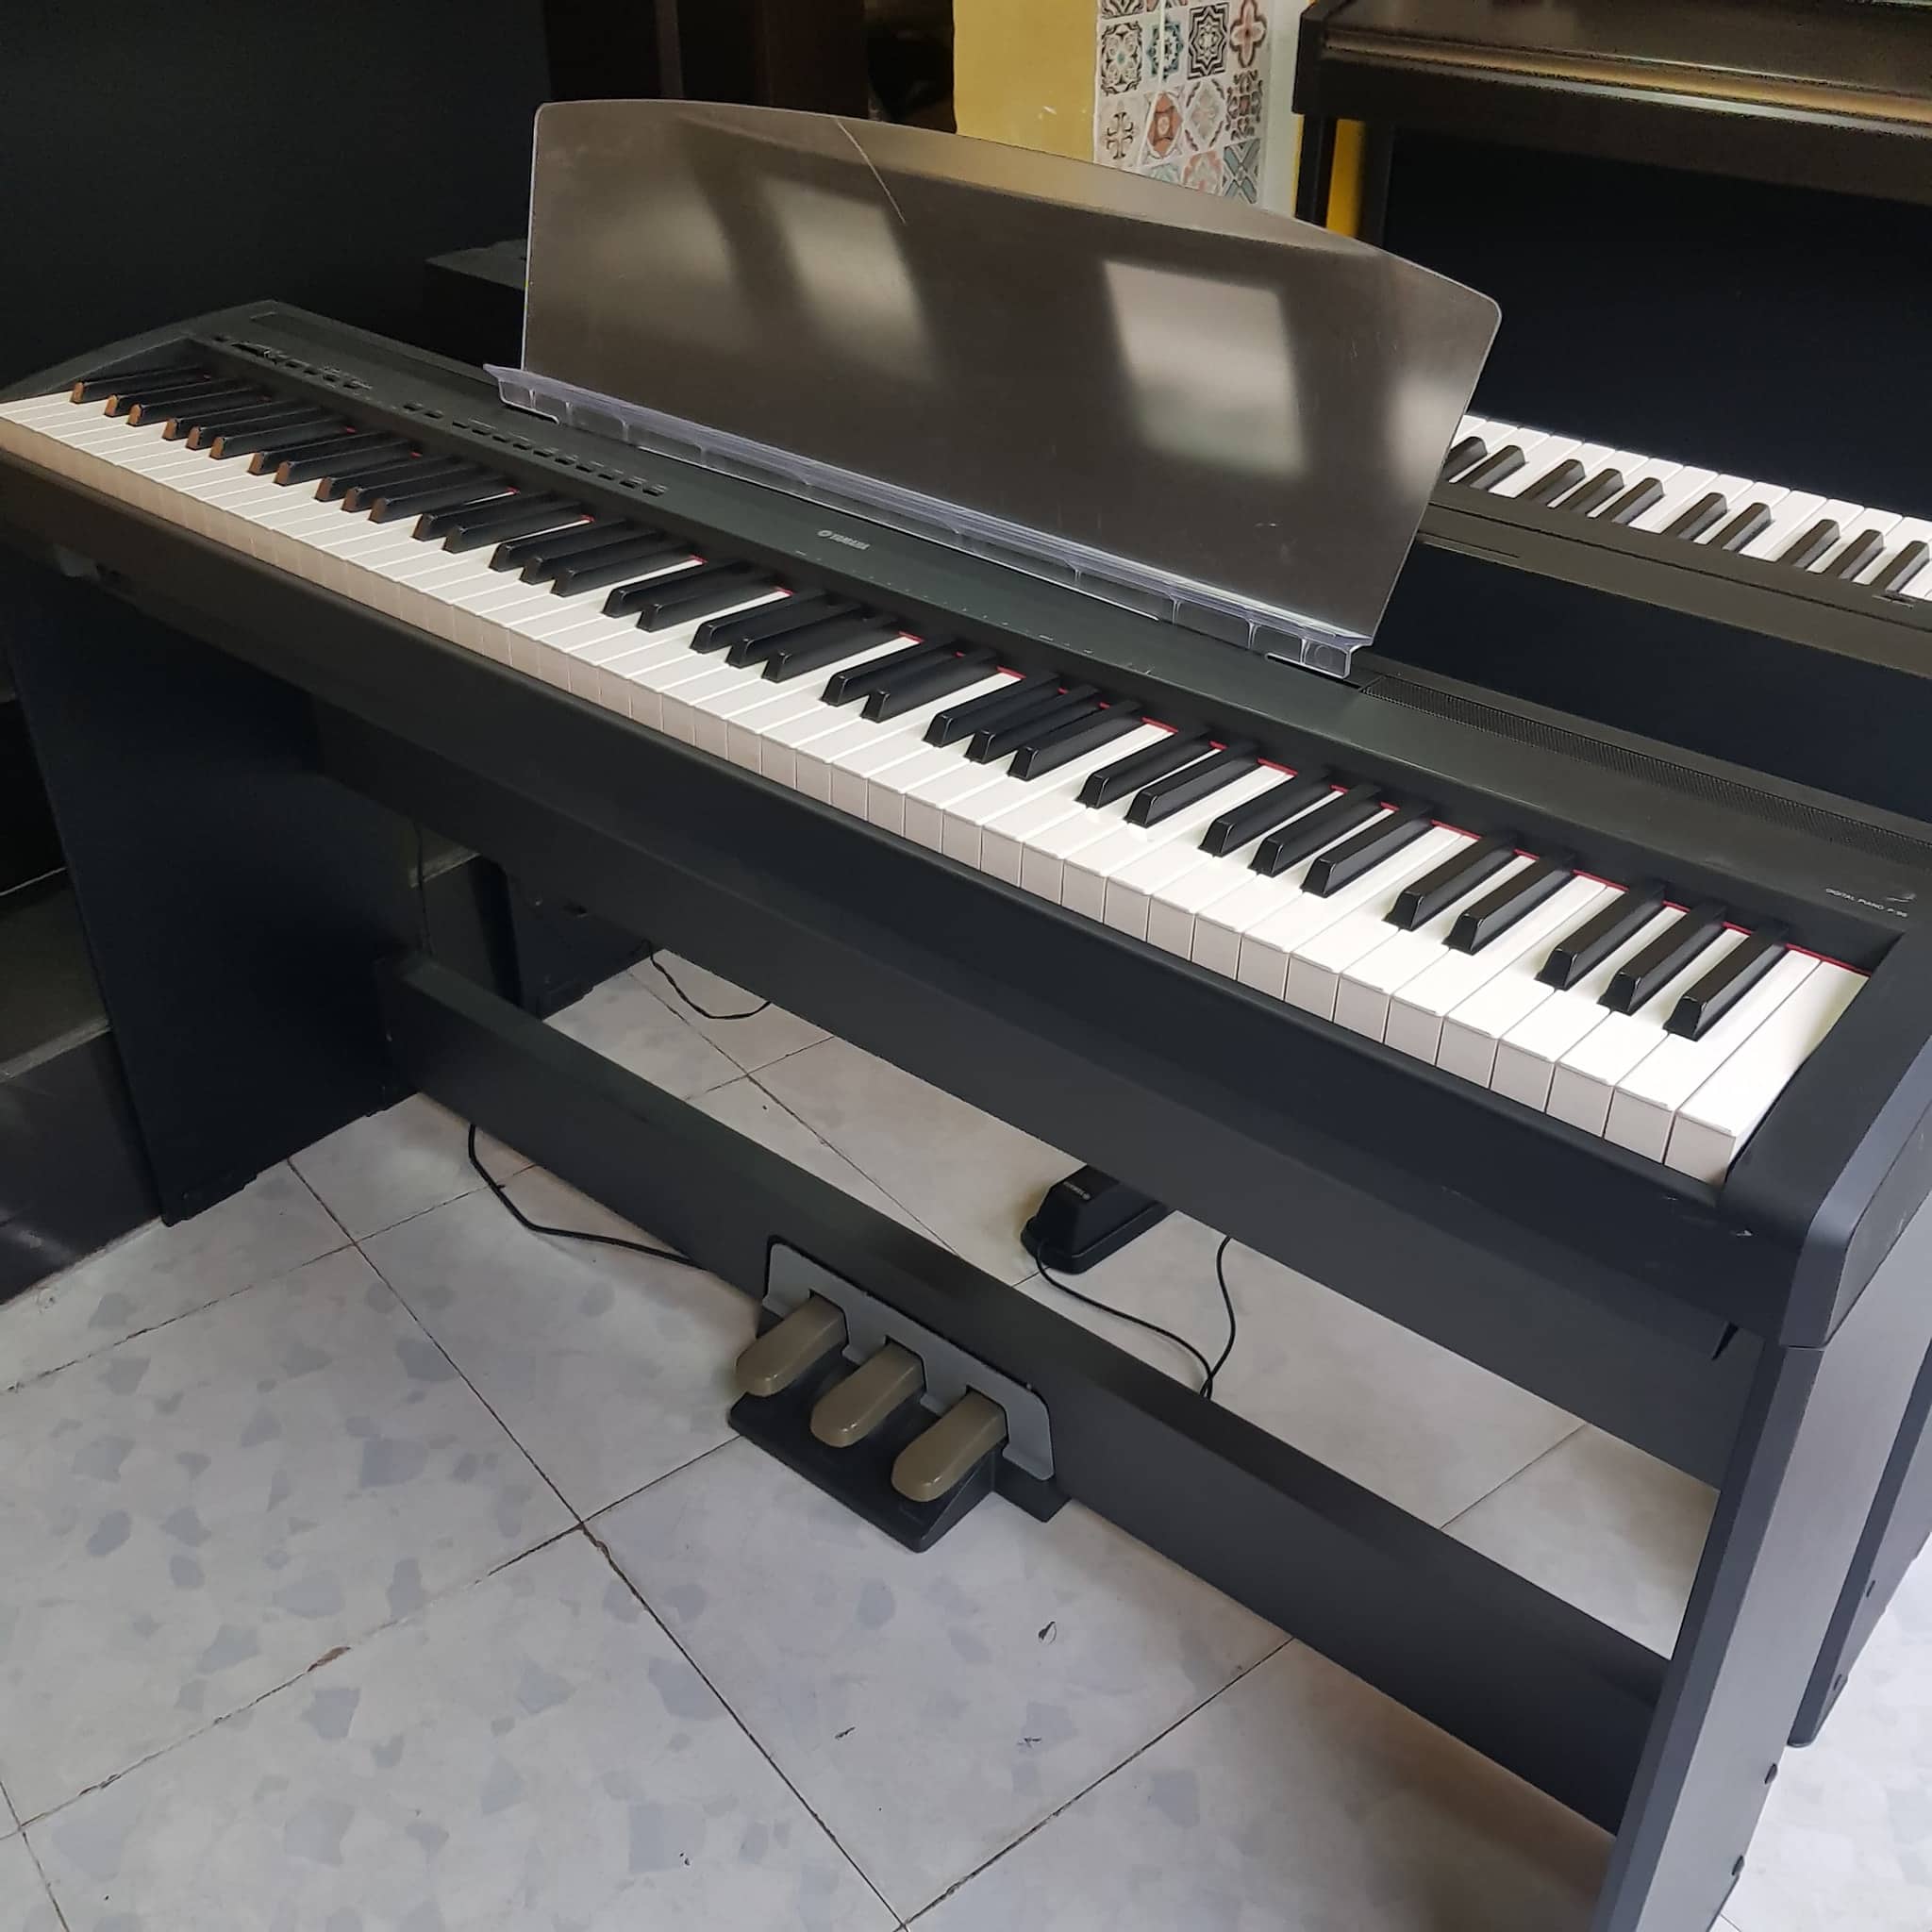 The Yamaha P95 has better connectivity options